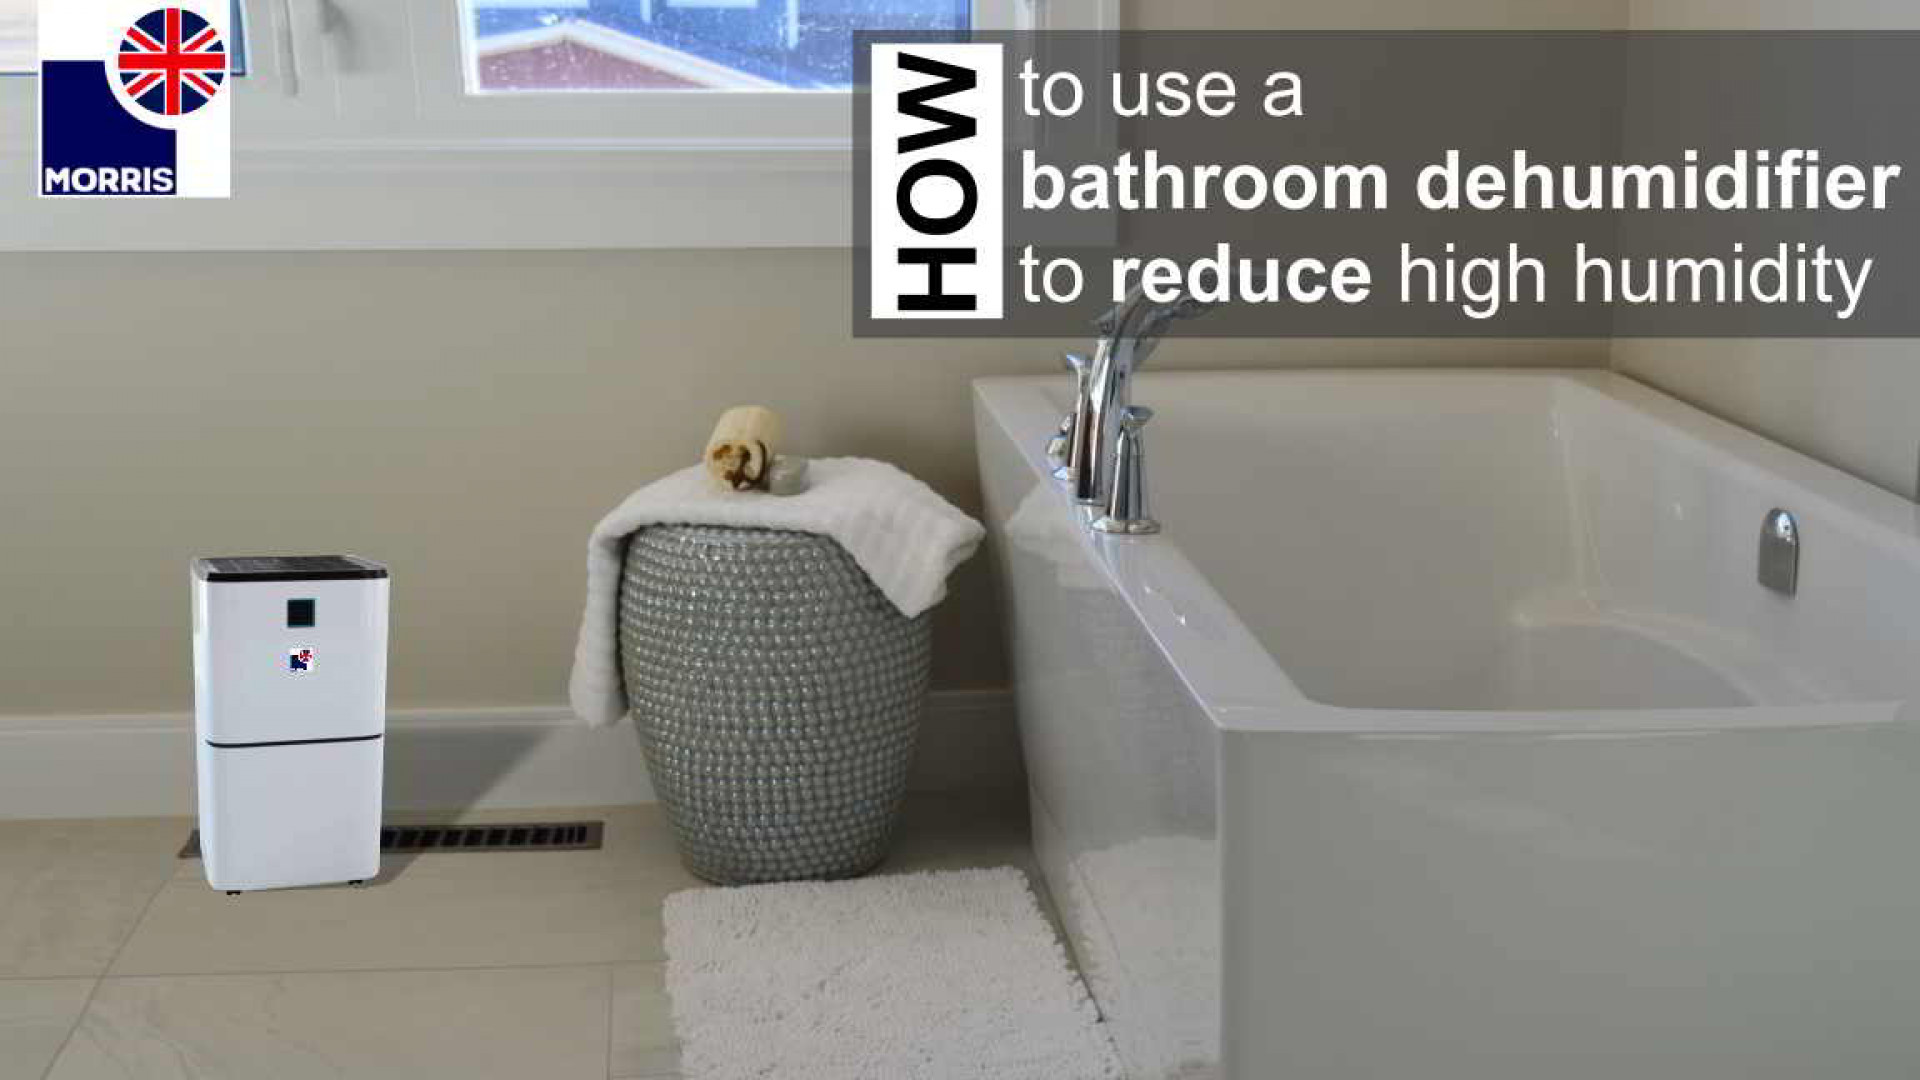 https://morrisdirect.co.uk/image/cache/catalog/Blog-posts/Morris-Dehumidifiers/How-to-use-a-bathroom-dehumidifier/How-to-use-a-bathroom-dehumidifier-to-reduce-high-humidity2-1920x1080.jpg